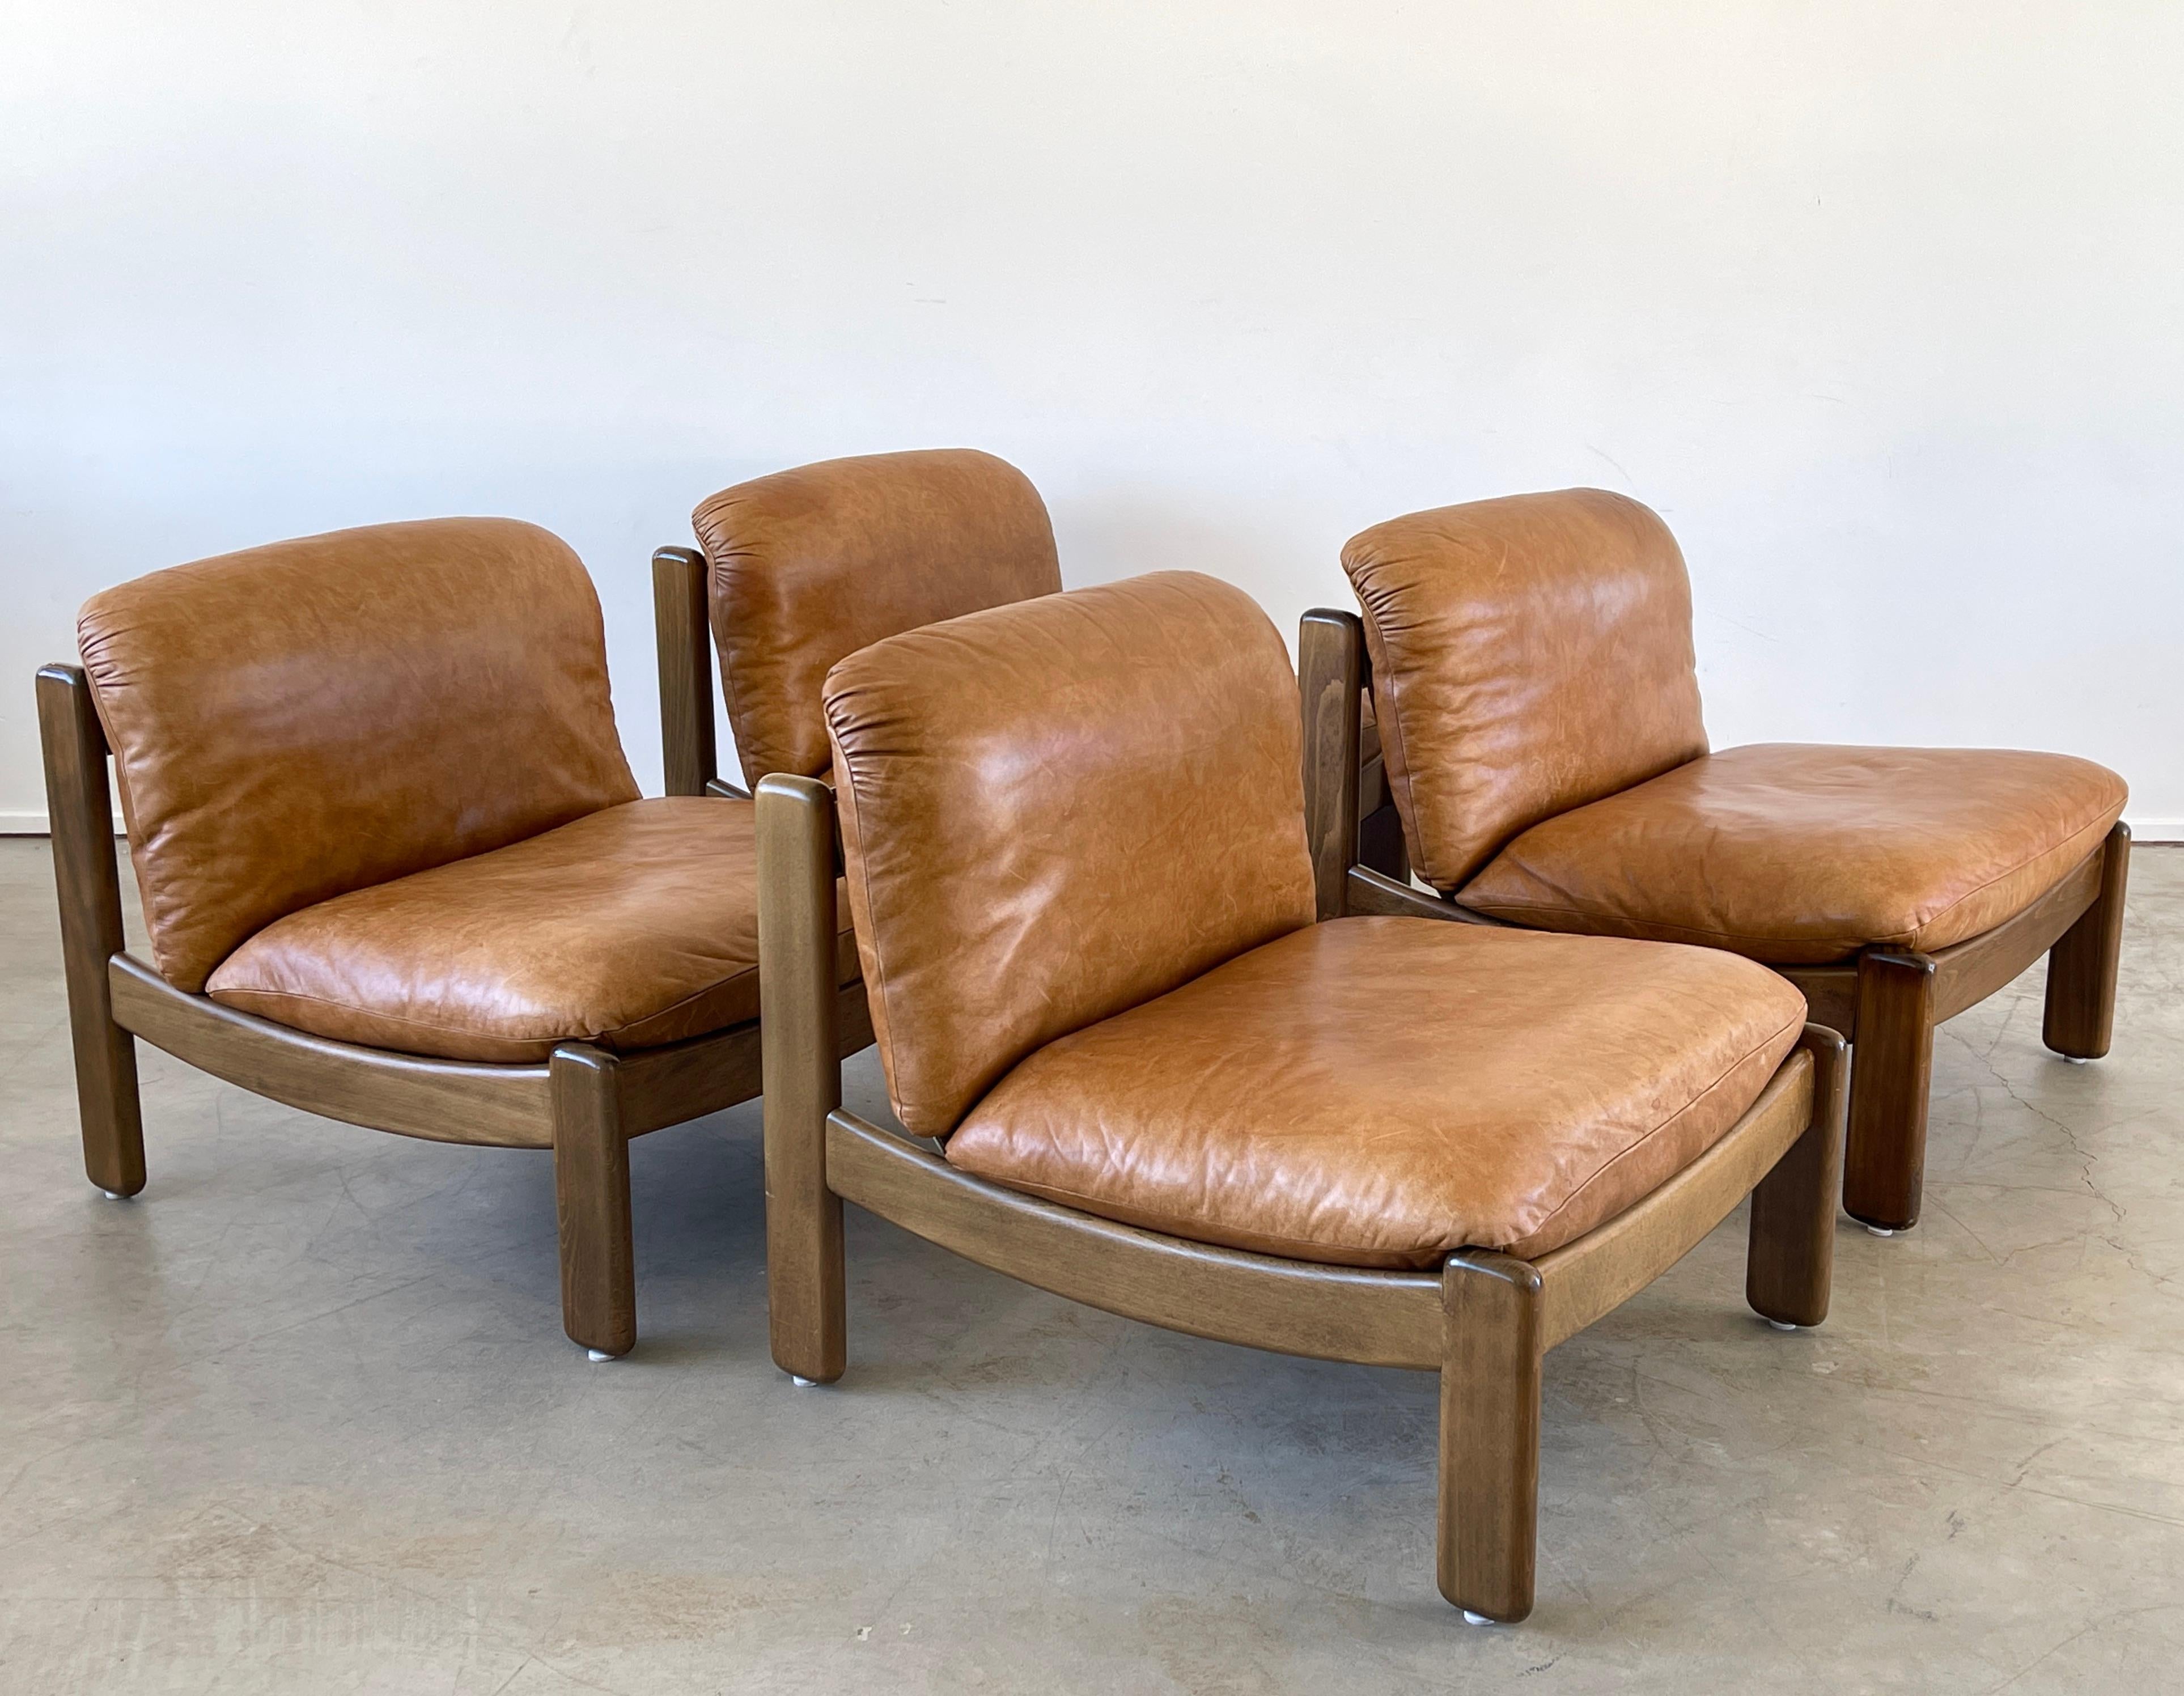 Great pair of Italian leather Lounge chairs with walnut frames in low linear shape 
Wonderful patina to leather and wood 
2 Pairs available /priced as a pair.